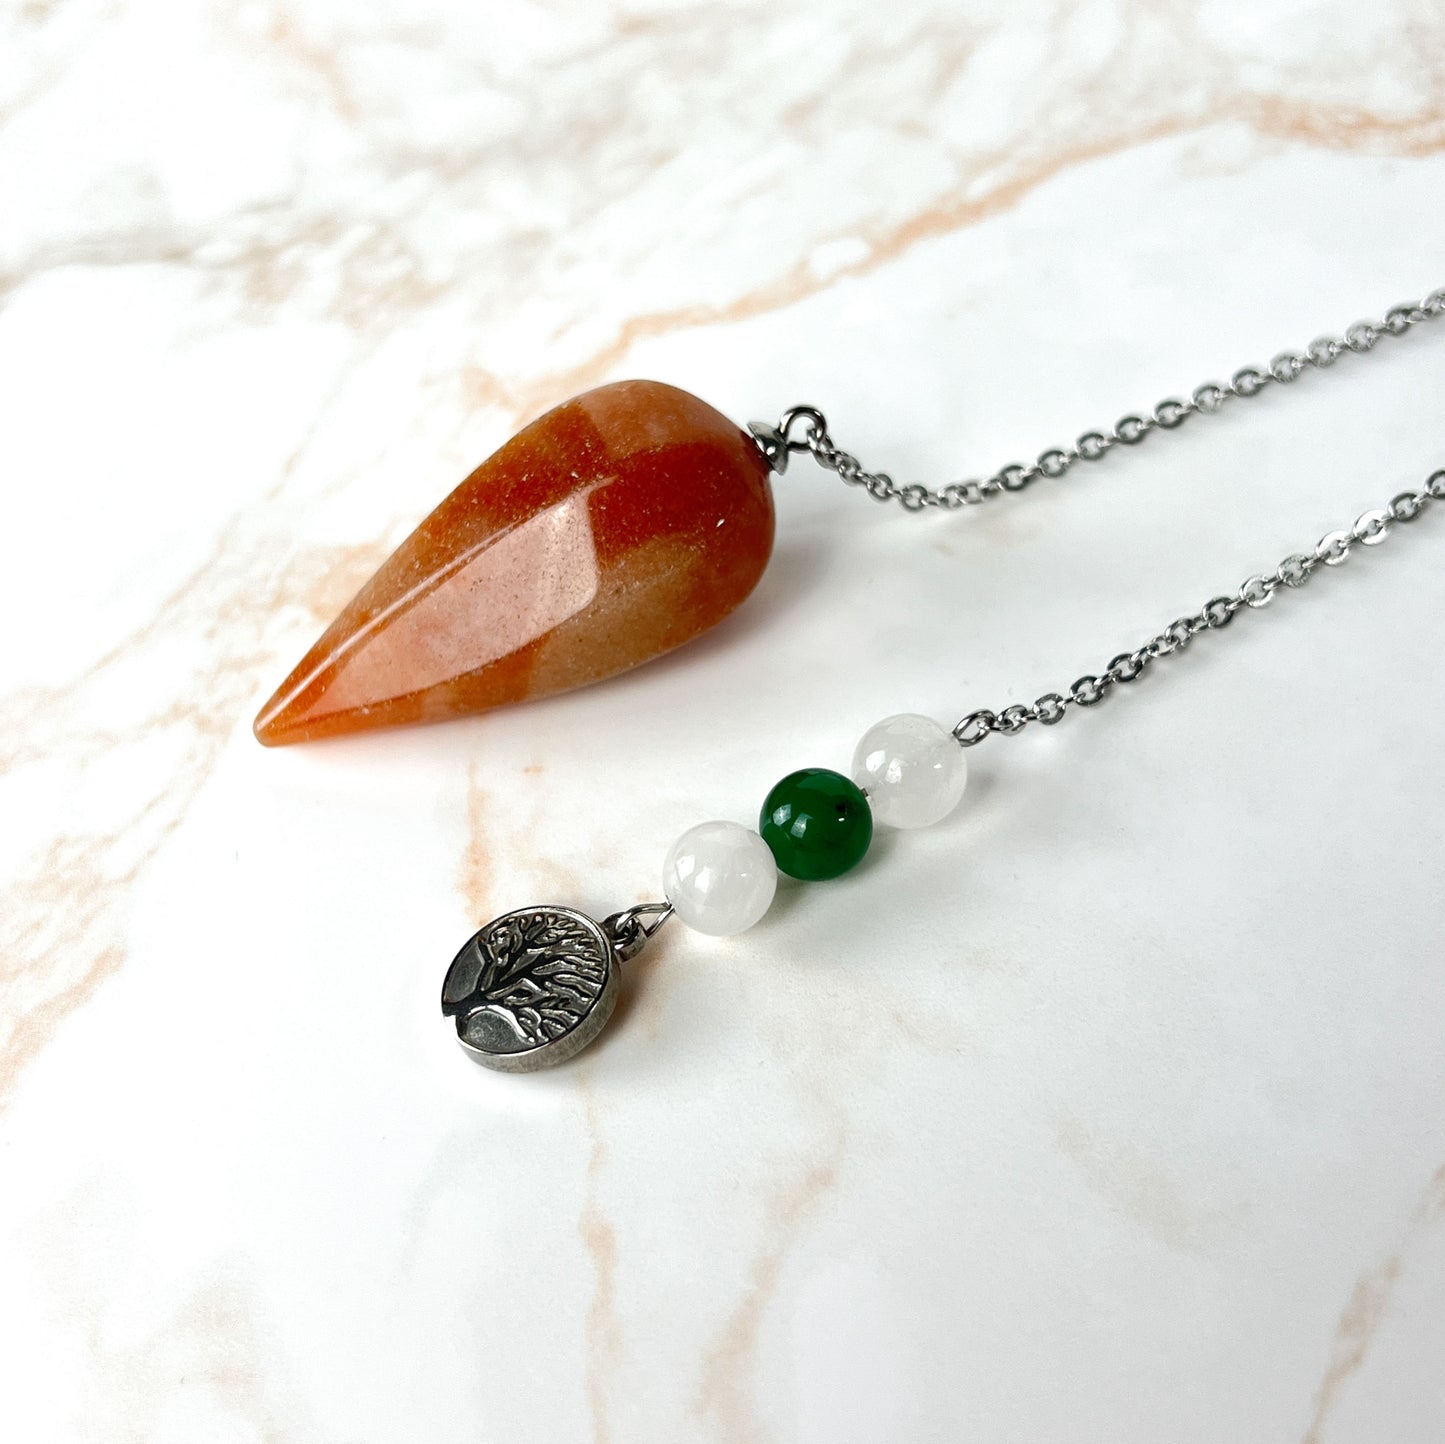 Orange and green aventurine, clear quartz, and tree of life stainless steel pendulum Baguette Magick